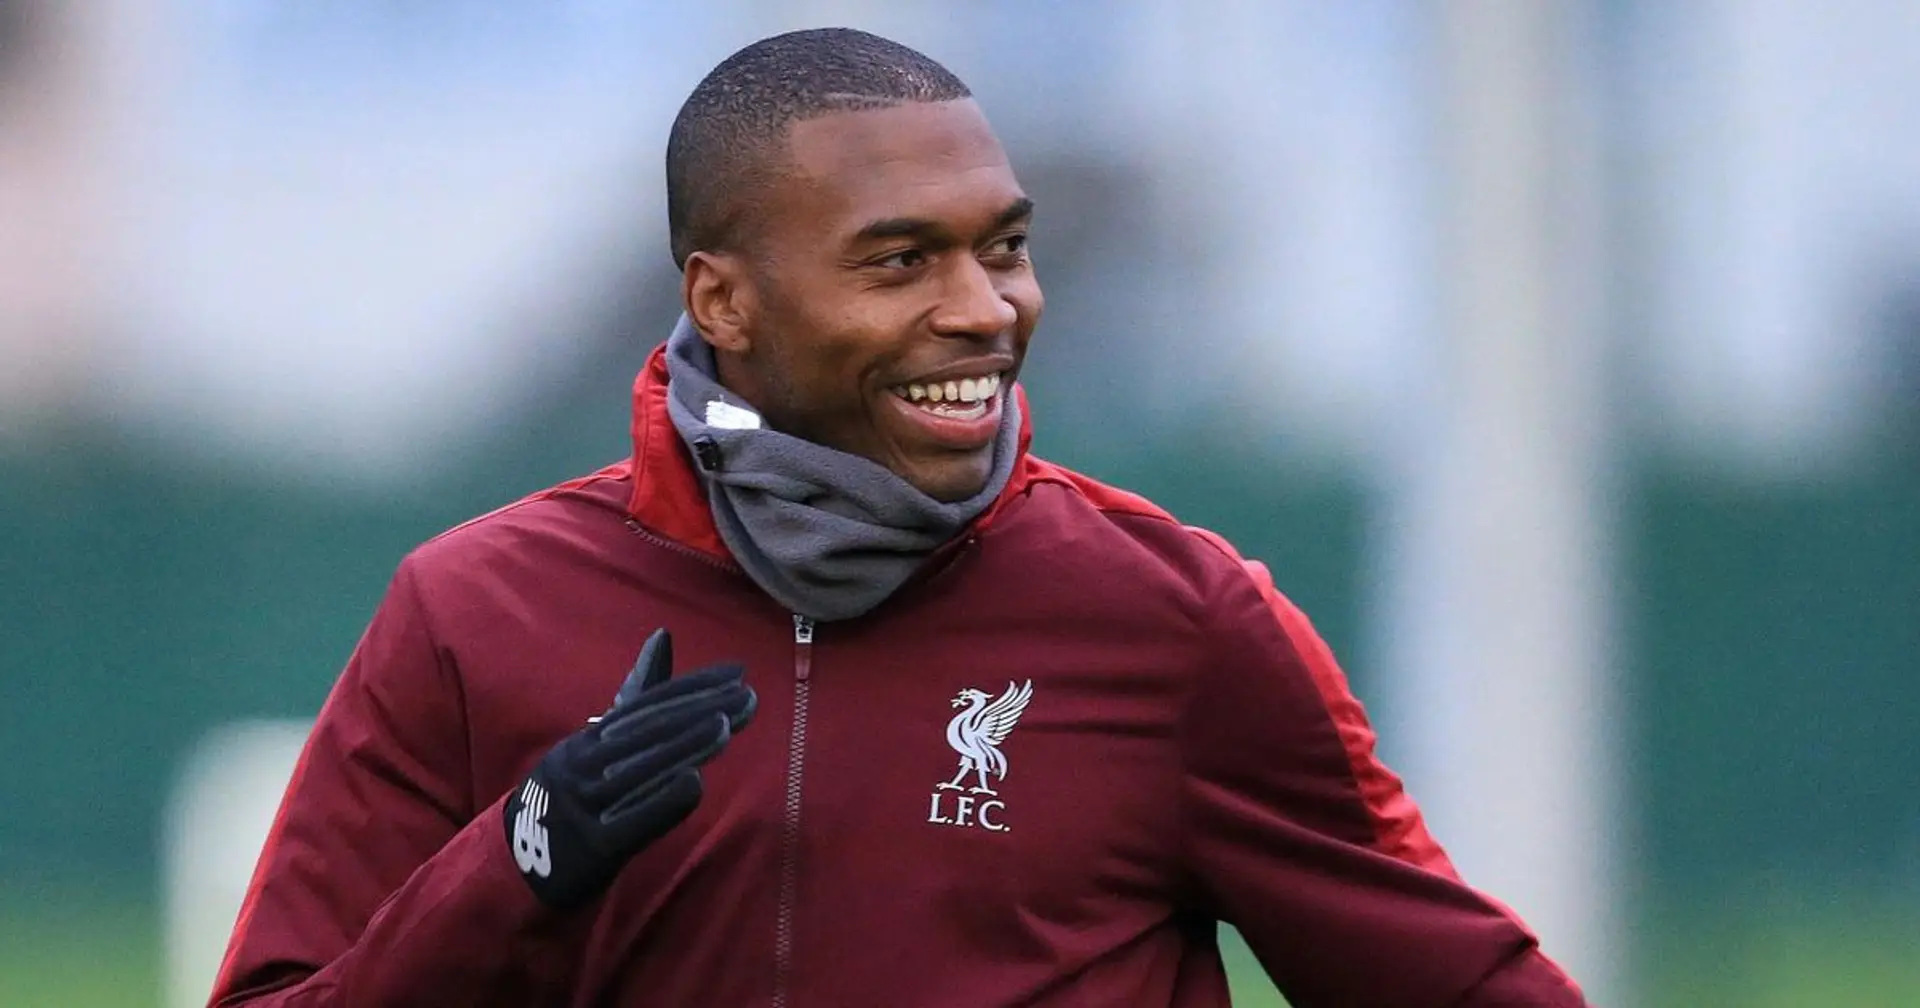 Daniel Sturridge trains with eighth-tier non-League side as he starts search for a new club